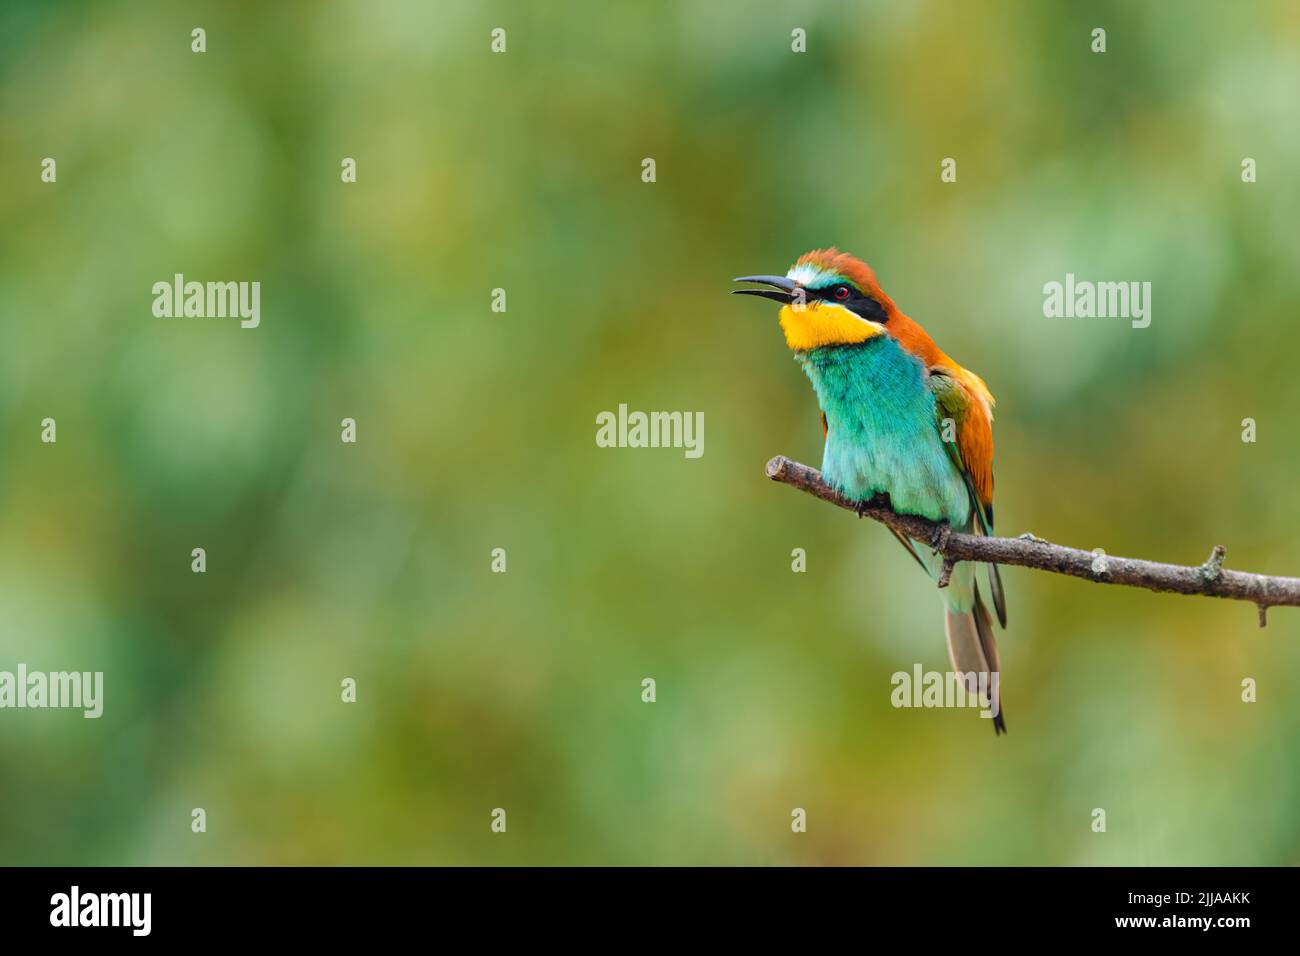 Beautiful colorful bird European bee-eater (Merops apiaster) perching on a branch, beak open. Blurred background. Summer day. Stock Photo